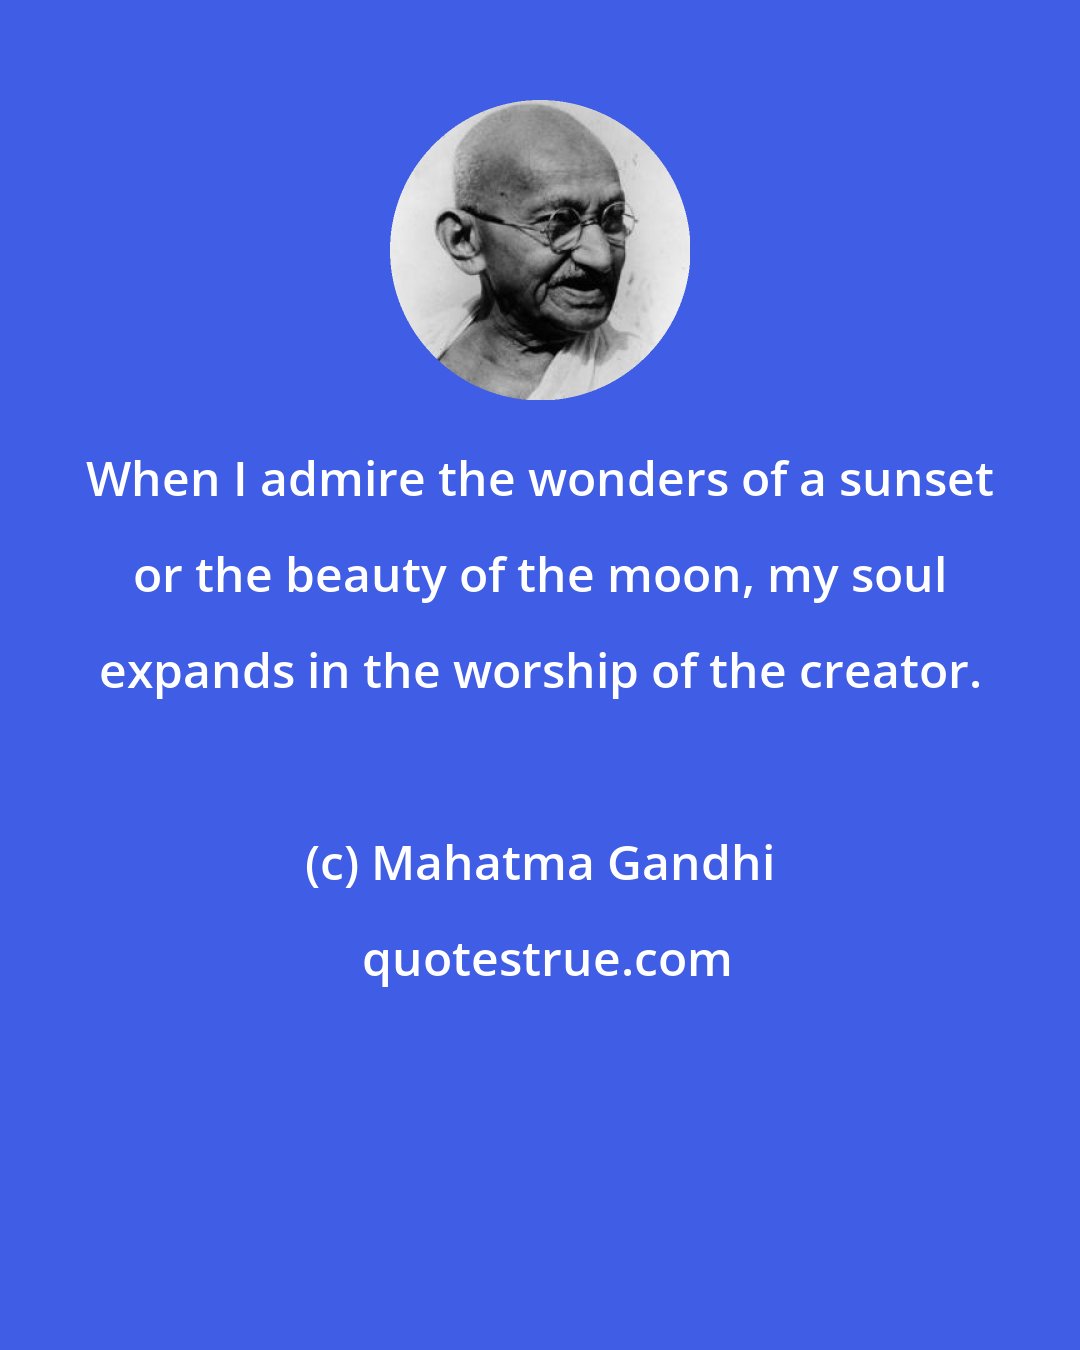 Mahatma Gandhi: When I admire the wonders of a sunset or the beauty of the moon, my soul expands in the worship of the creator.